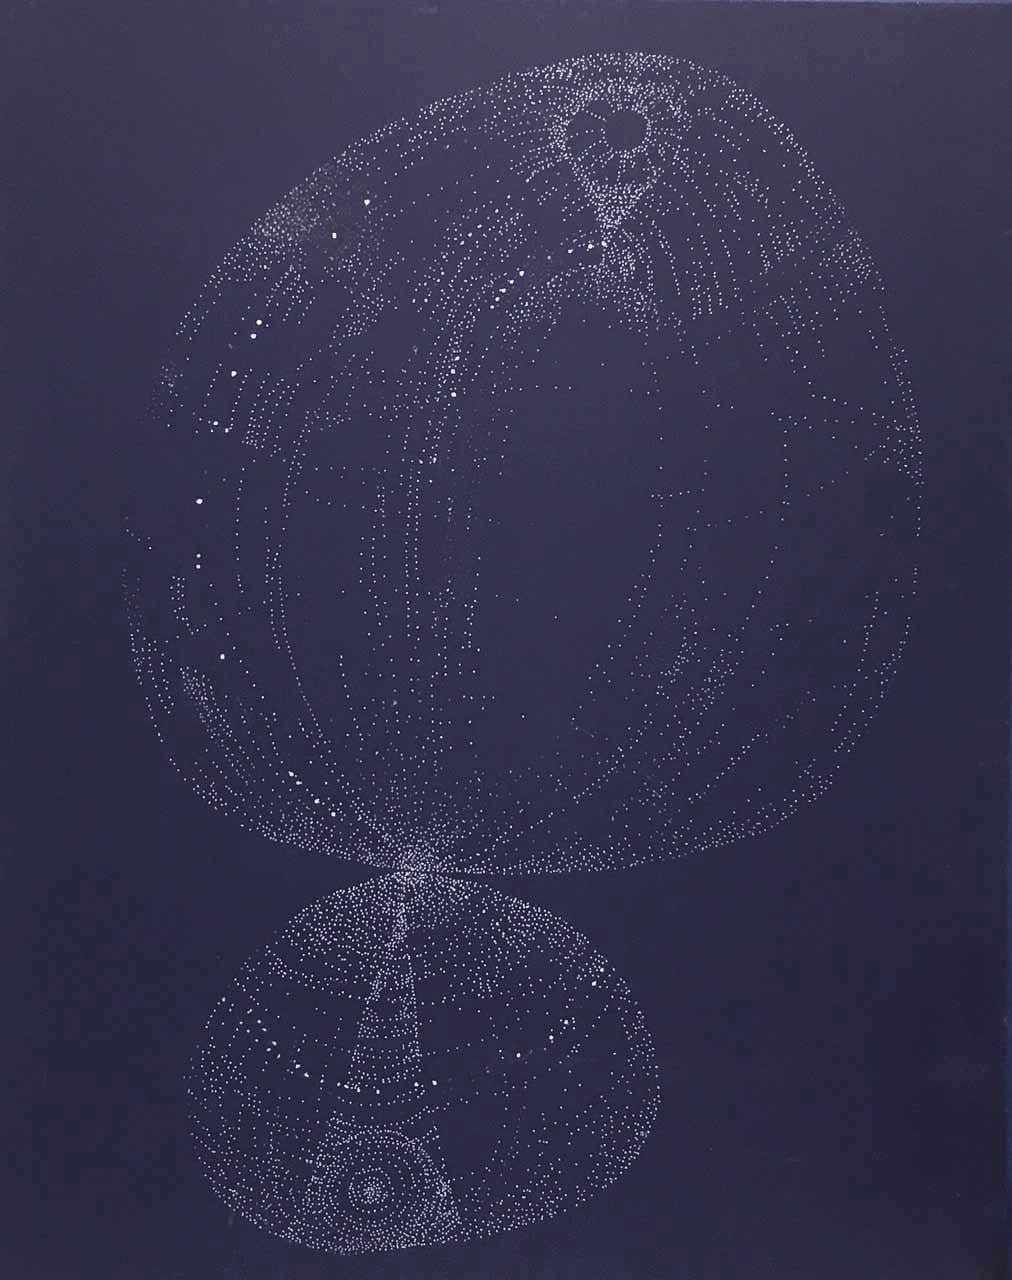 Andra Samelson, Next to Nothing 14, 2001, ink on mat board, 40x 32 inches